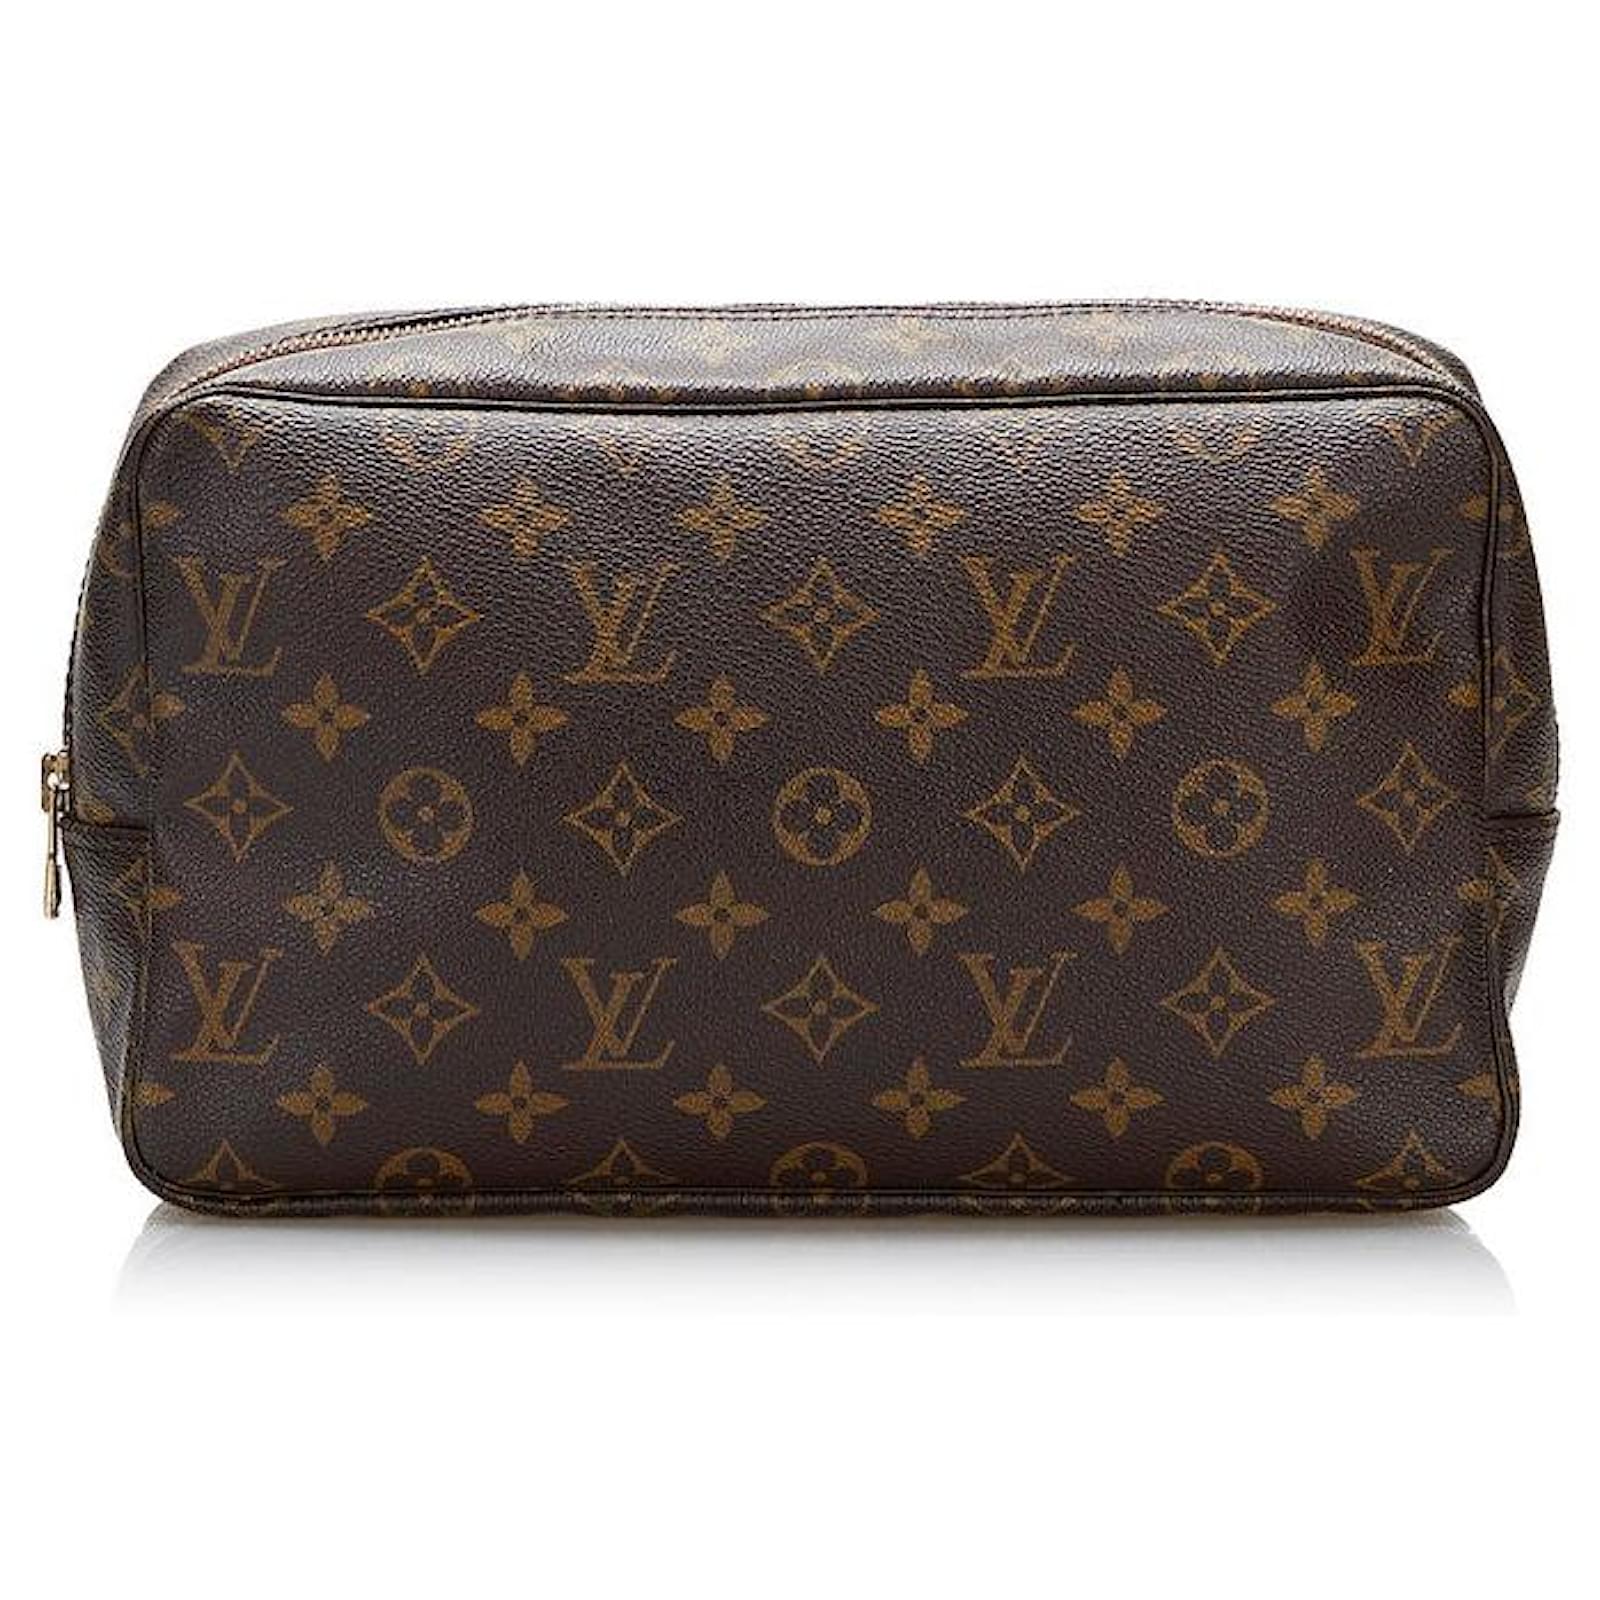 Louis Vuitton Vanity Bags, Authenticity Guaranteed